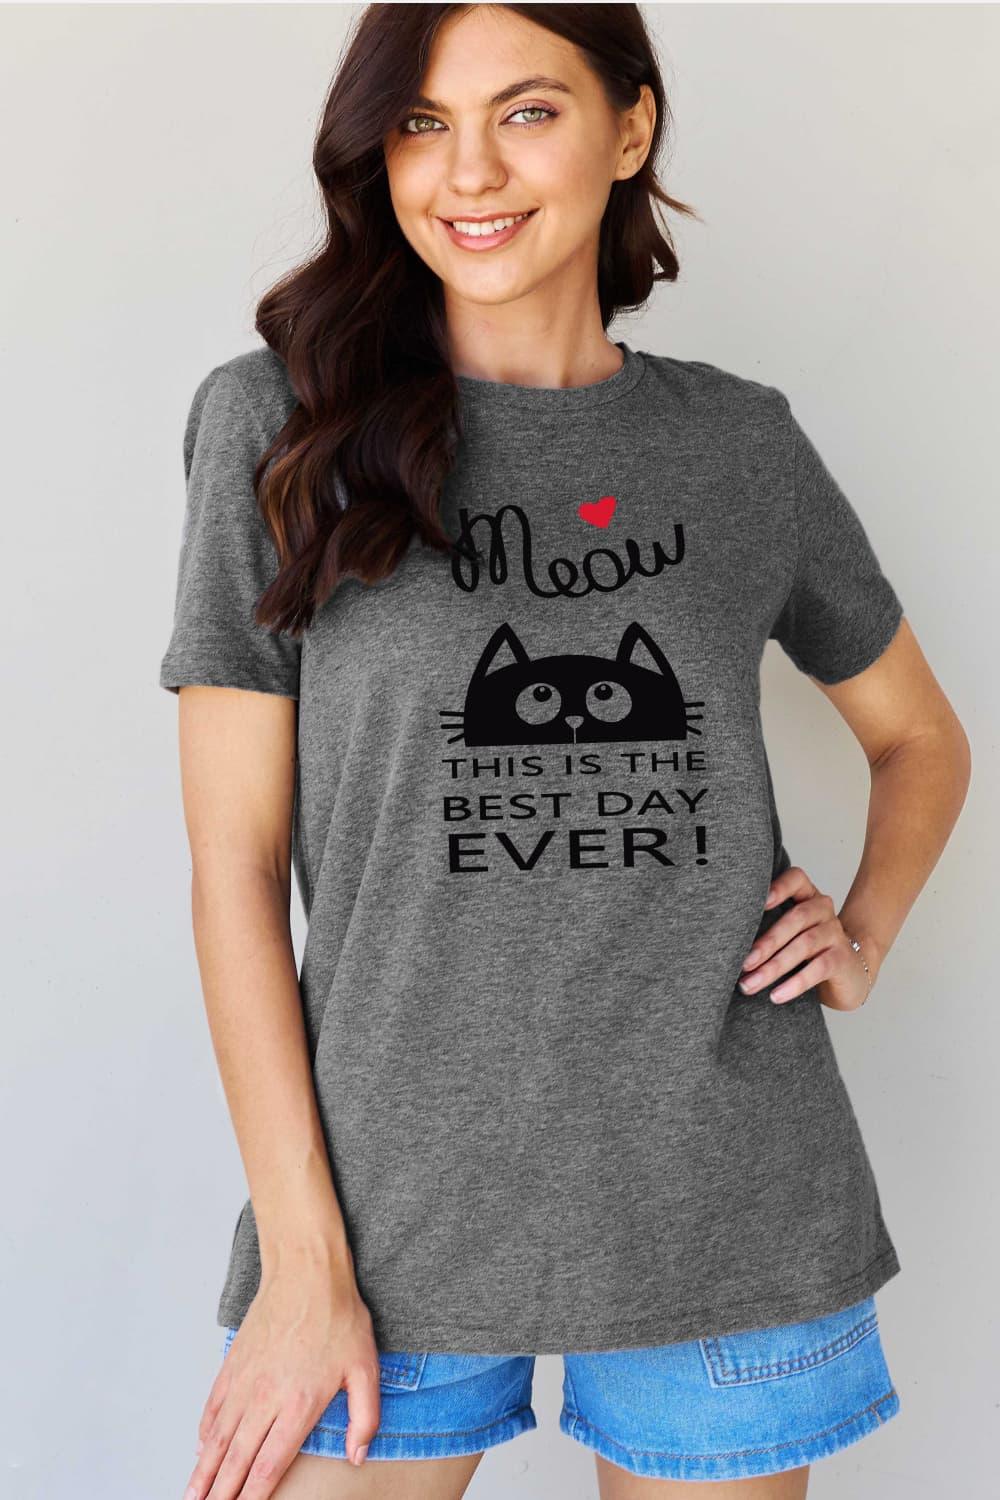 Simply Love Full Size MEOW THIS IS THE BEST DAY EVER! Graphic Cotton T-Shirt - Crazy Like a Daisy Boutique #